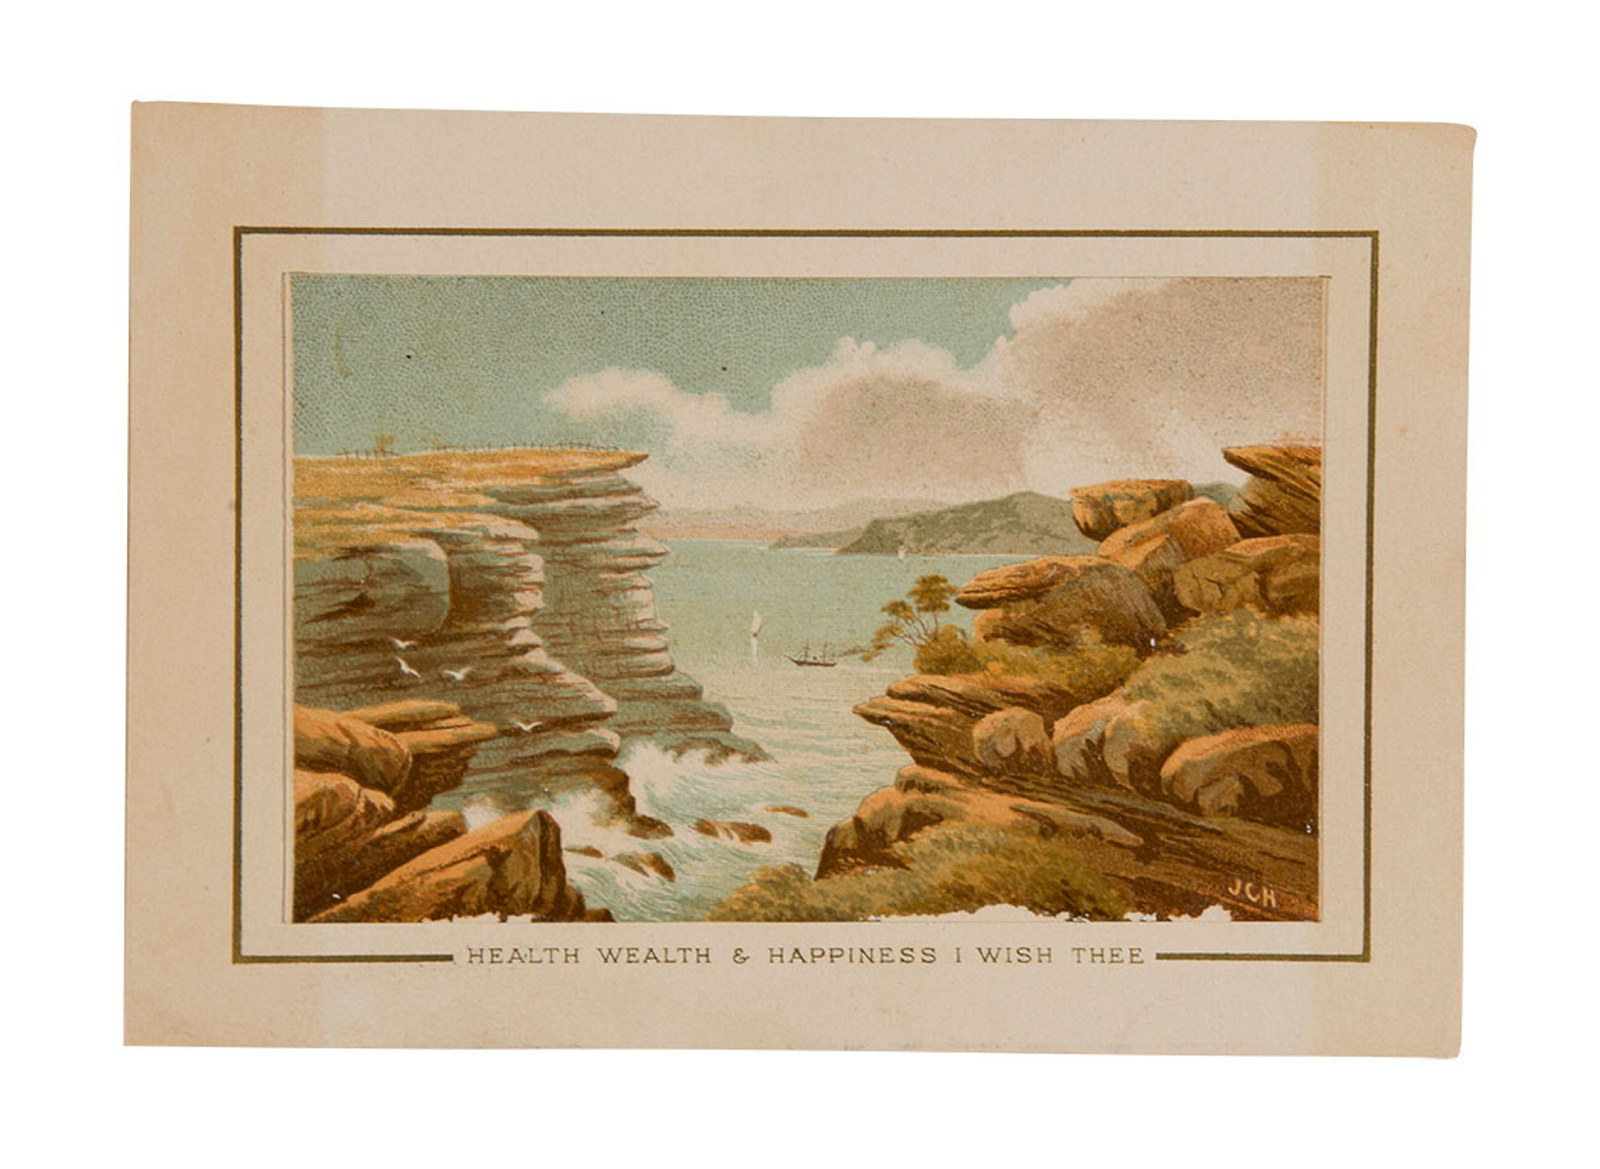 Discoloured image from scrap album of sandstone landscape, with sea in background.